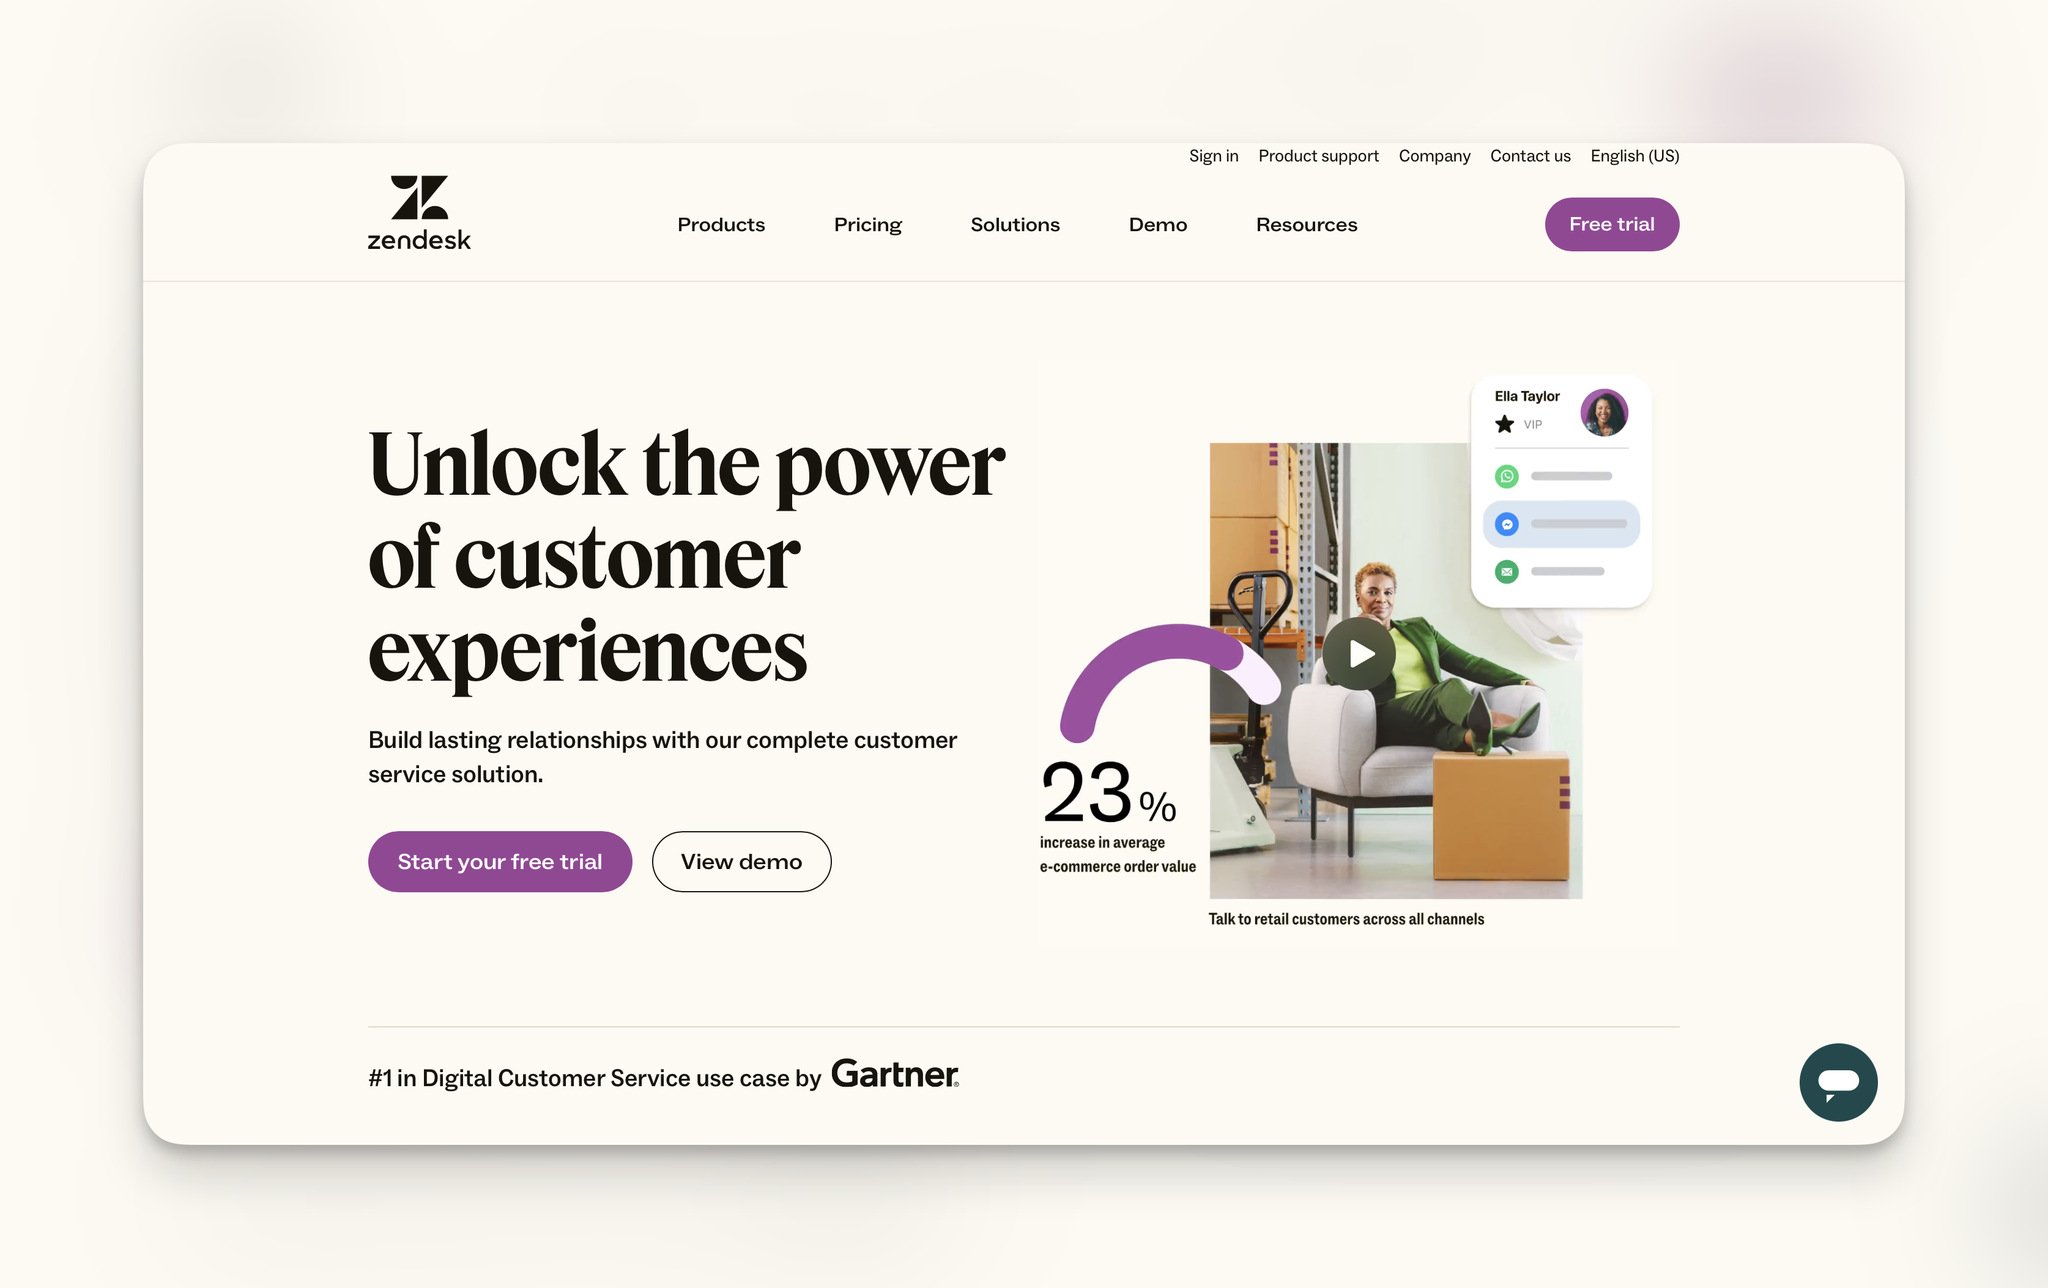 Zendesk's homepage with "Unlock the power of customer experiences" headline on the left followed by "Start your free trial" and "View demo" buttons and on the right, there is a video preview displaying a female